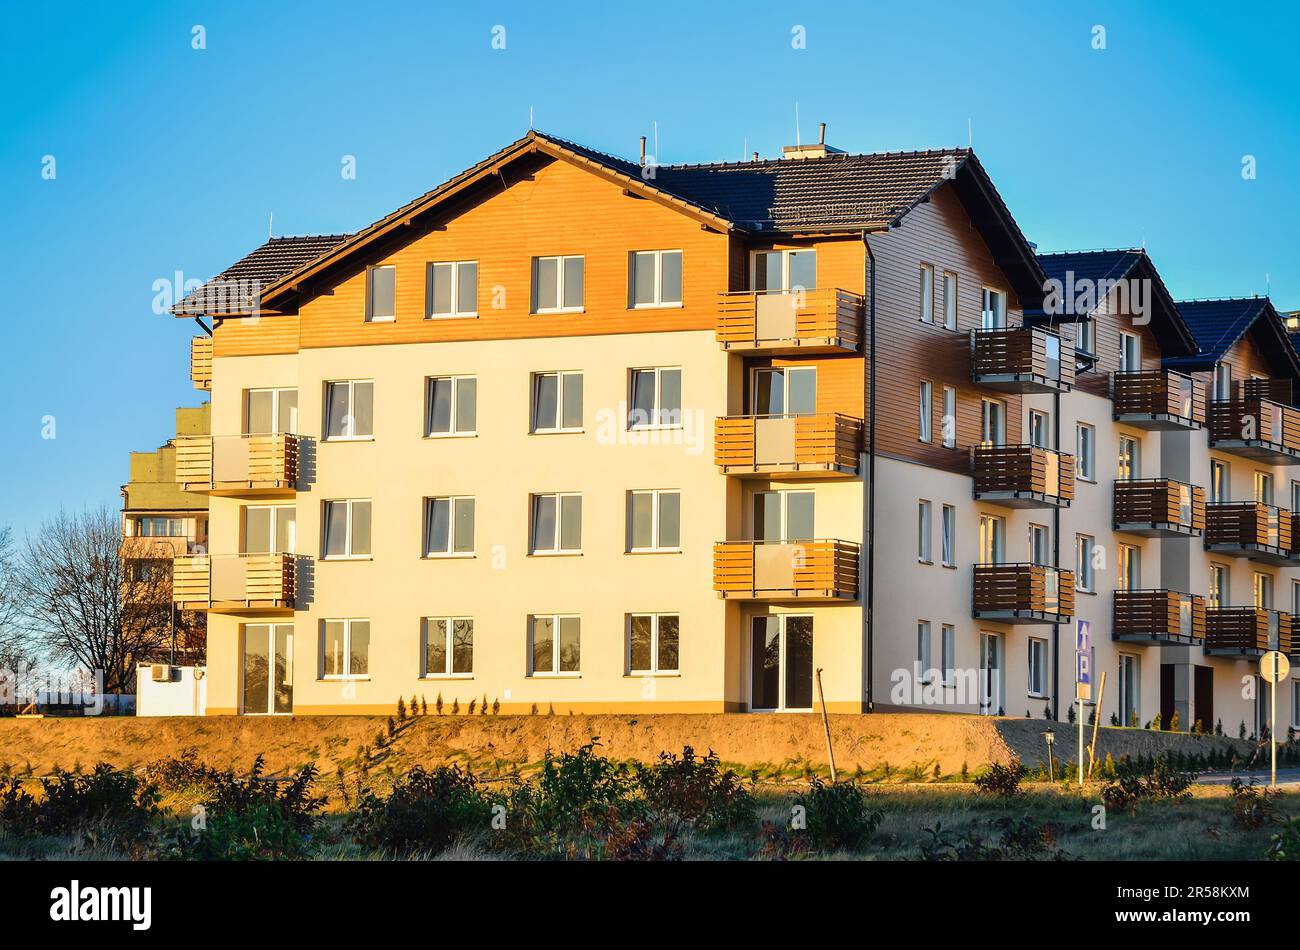 Tychy, Poland - November 8, 2015: New housing estates in Tychy City, Poland. Public view of newly built block of flats in the green area. Stock Photo